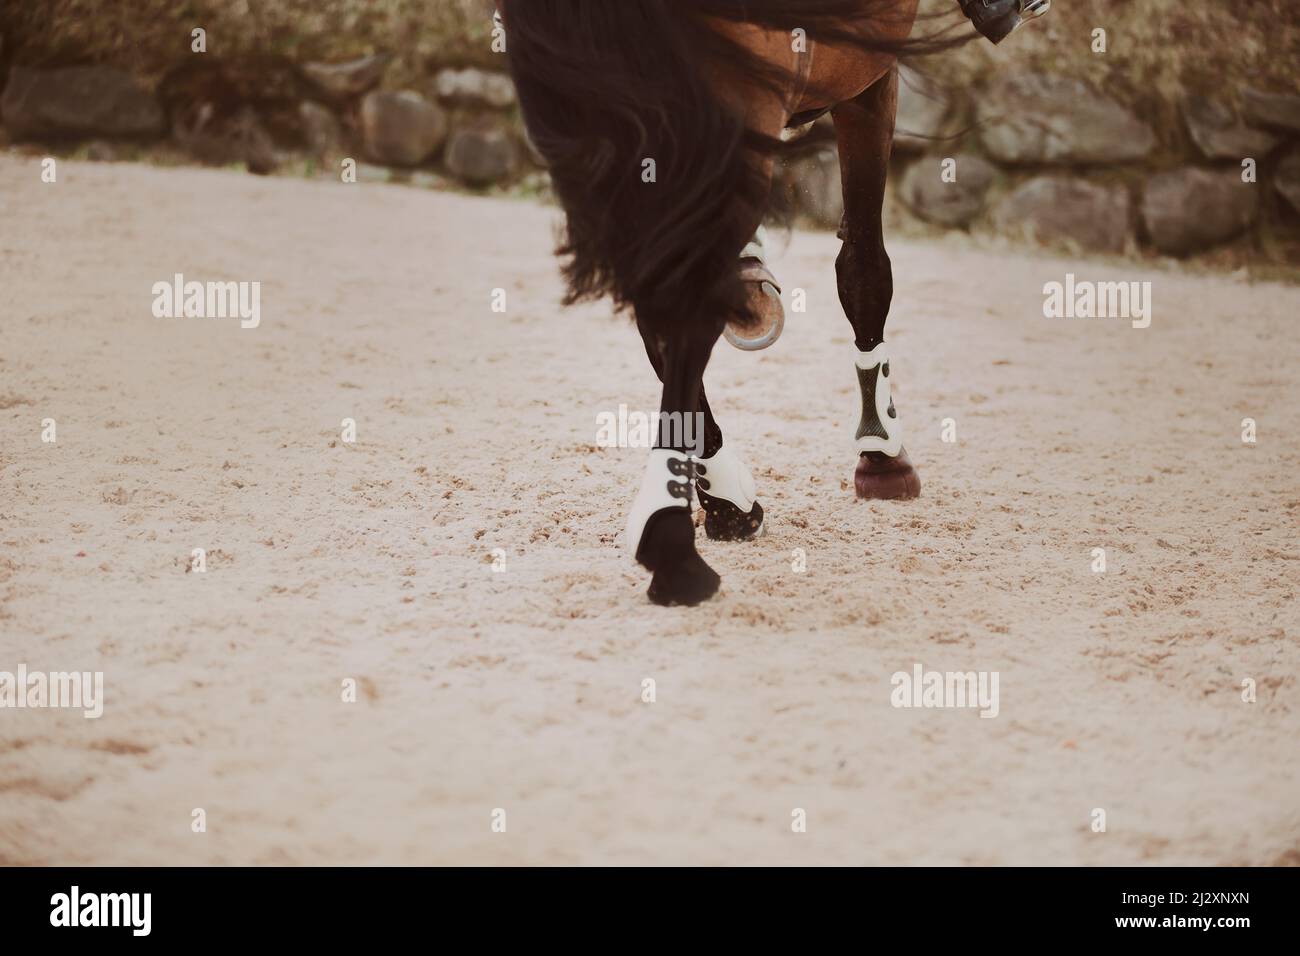 The hooves of a bay fast horse with a long tail, galloping, step on the sand in the arena. Equestrian sports. Horse riding. Stock Photo